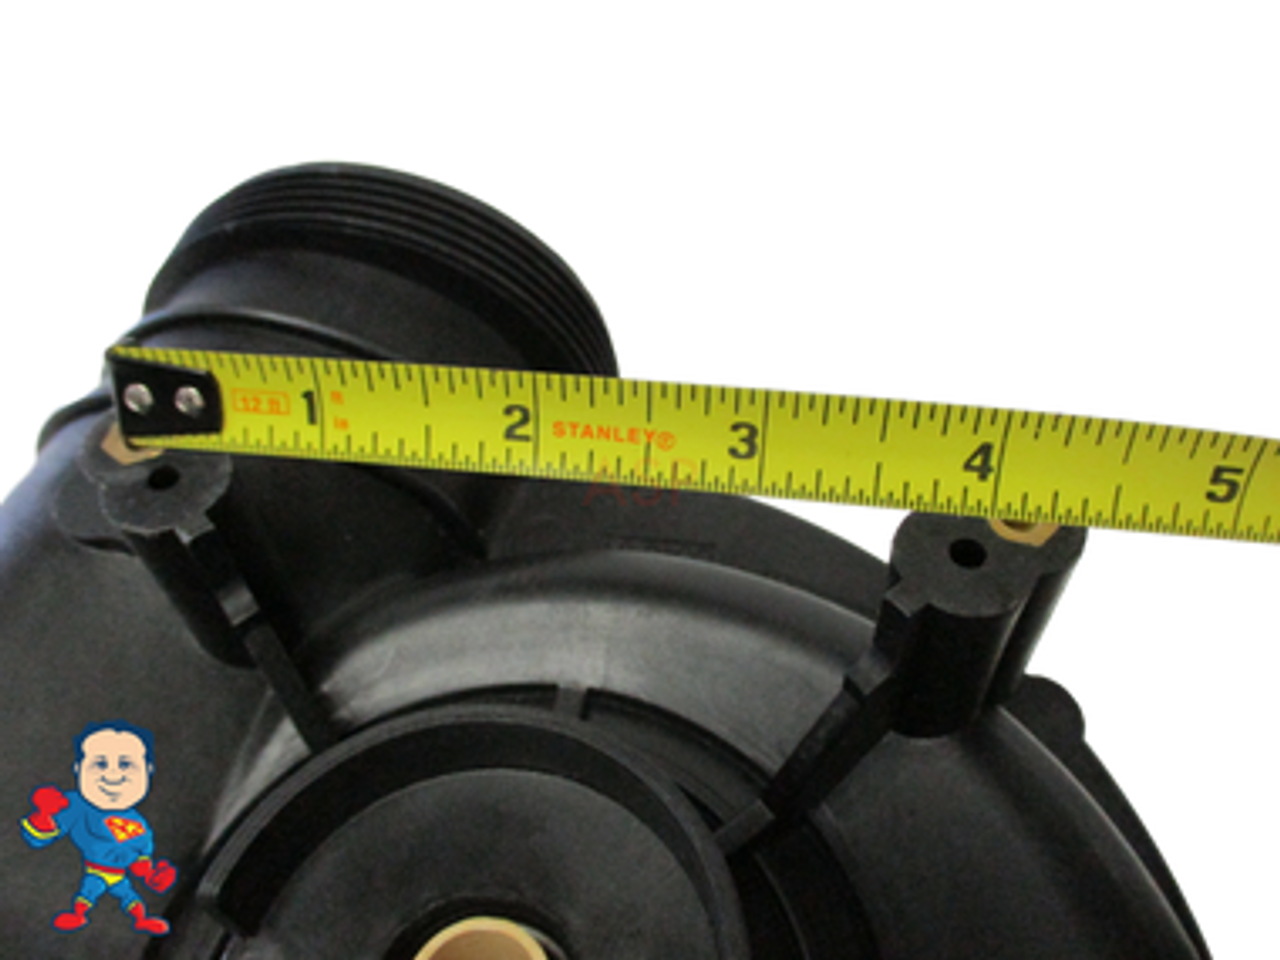 This fits a 56fr motor that will measure about 4 1/8" between the bolts in a square pattern..